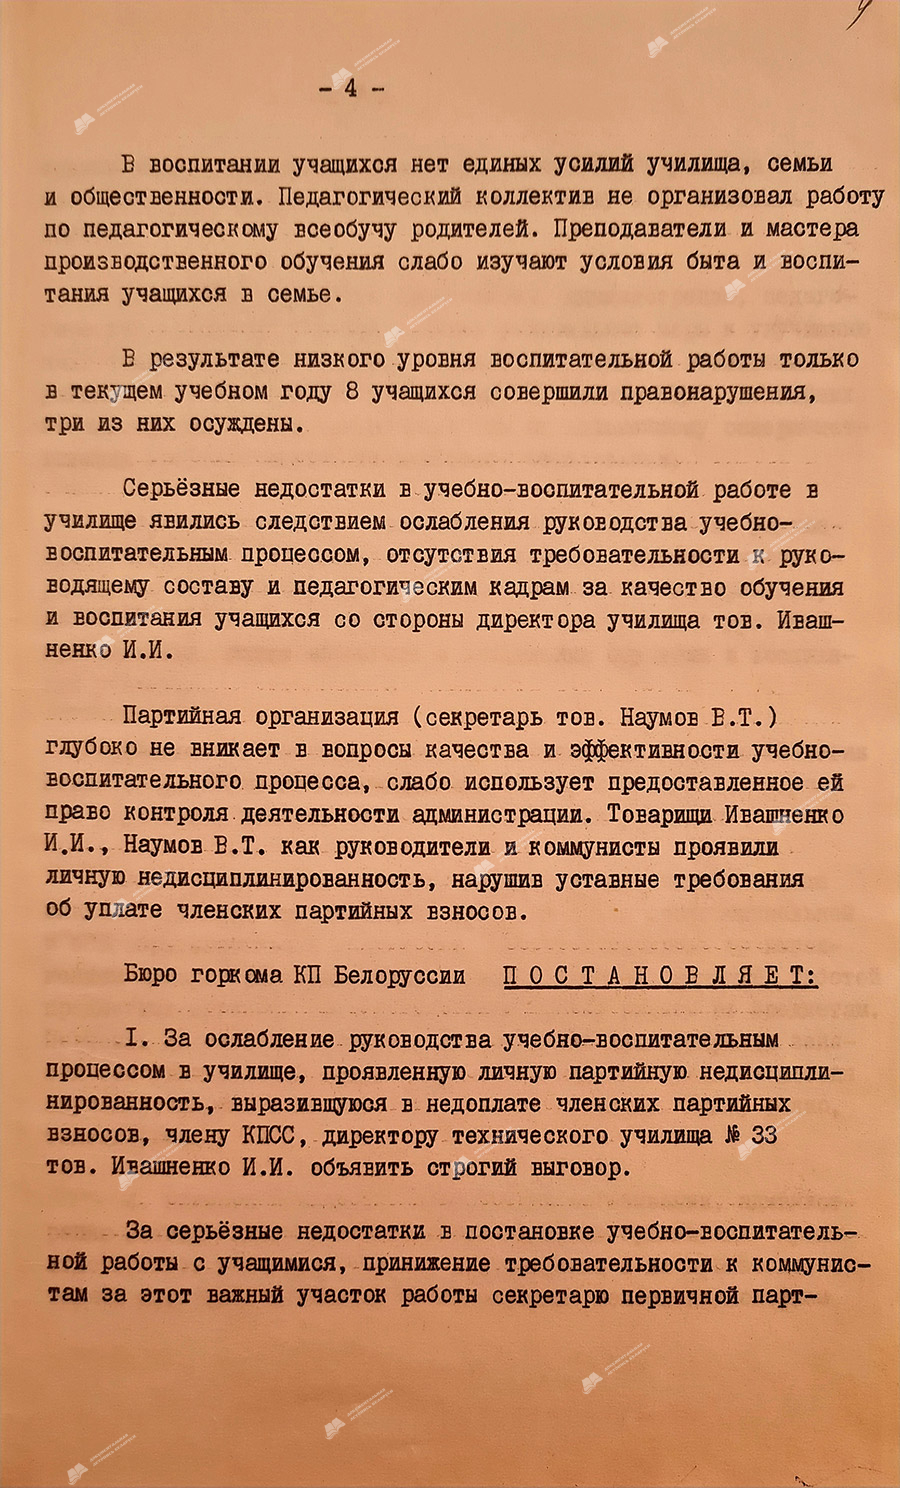 From the protocol No. 19 of the meeting of the bureau of the Mogilev city committee of the Communist Party of Belarus «On the work of the party organization and the administration of technical school No. 33 of metal workers to improve the quality of training and education of skilled workers for the national economy in the light of the requirements of the 25th Congress of the CPSU»-стр. 3